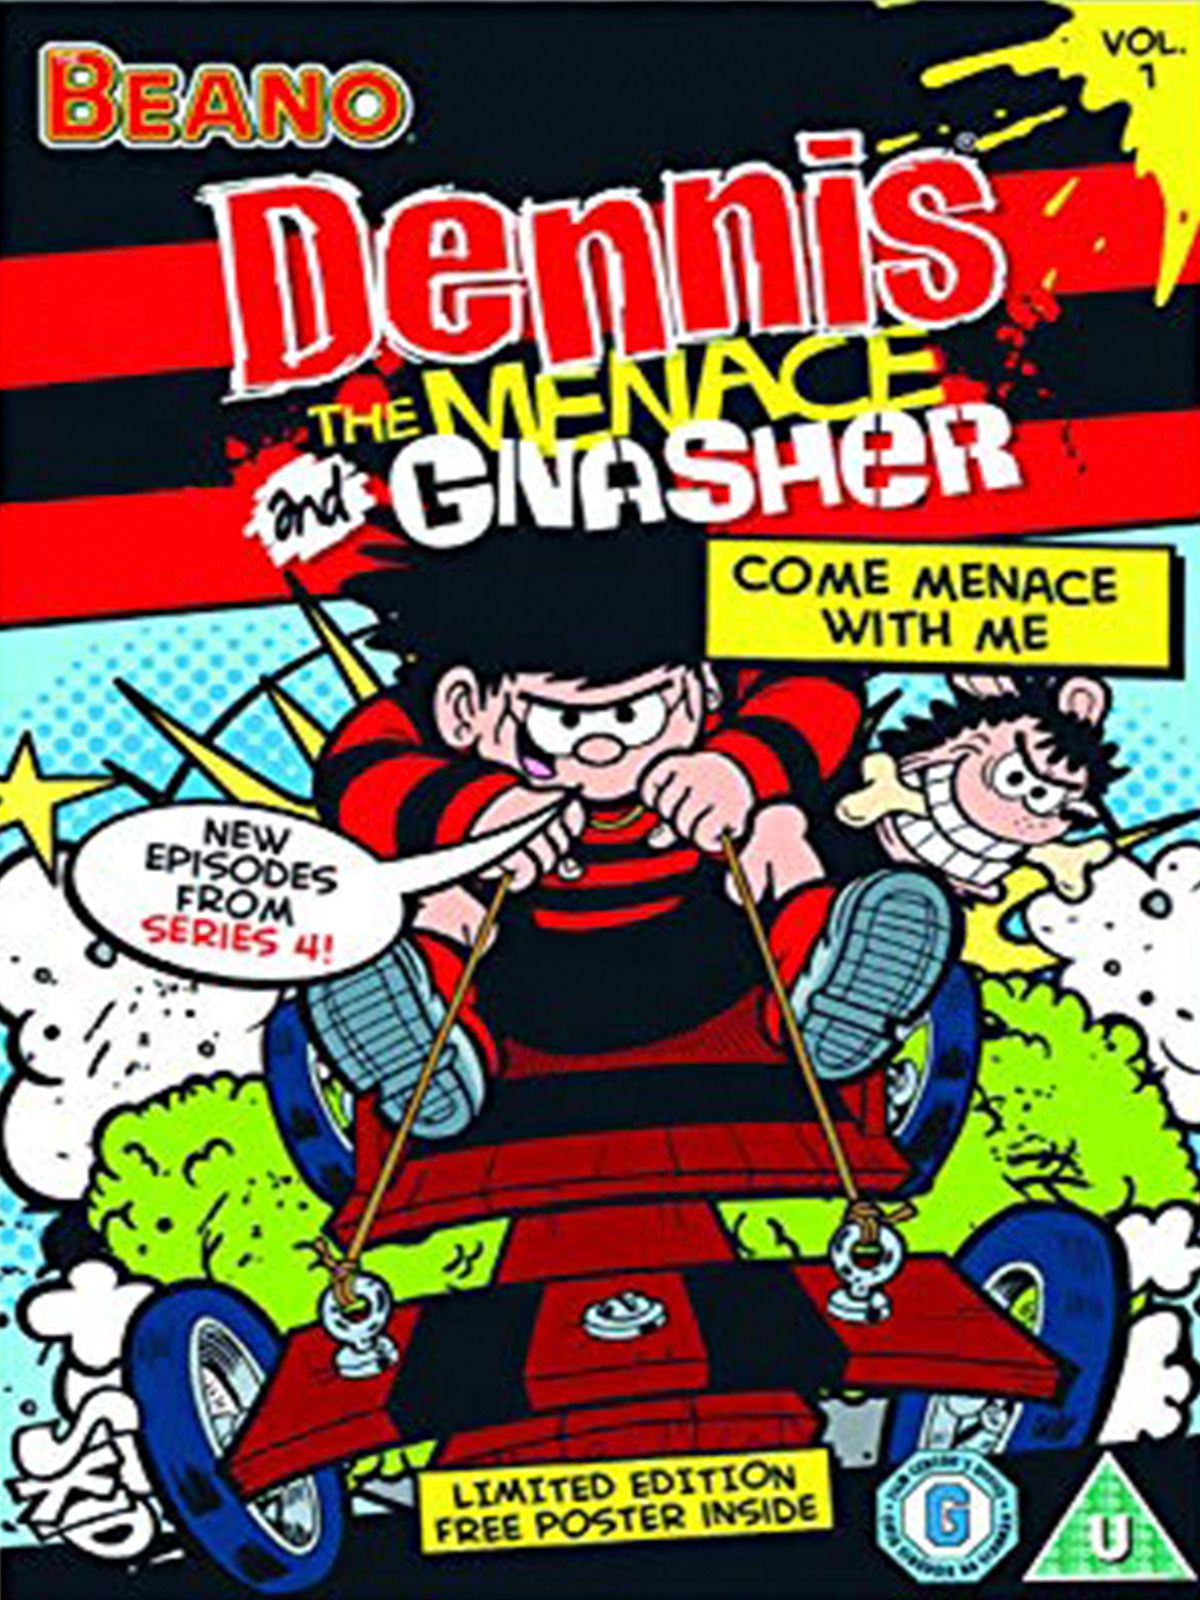 Dennis The Menace And Gnasher Wallpapers - Wallpaper Cave